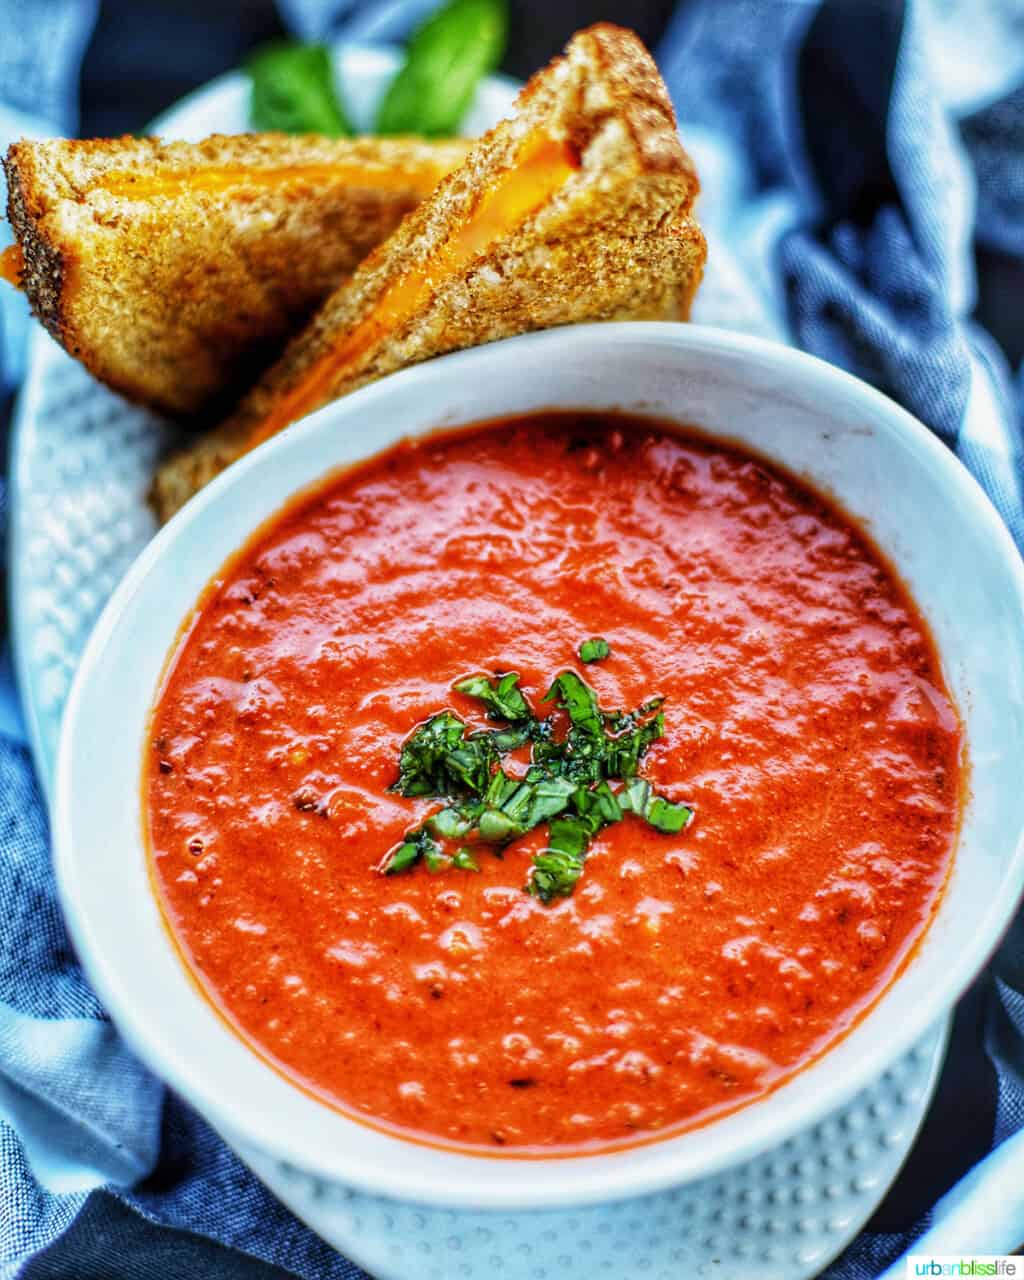 tomato soup and grilled cheese